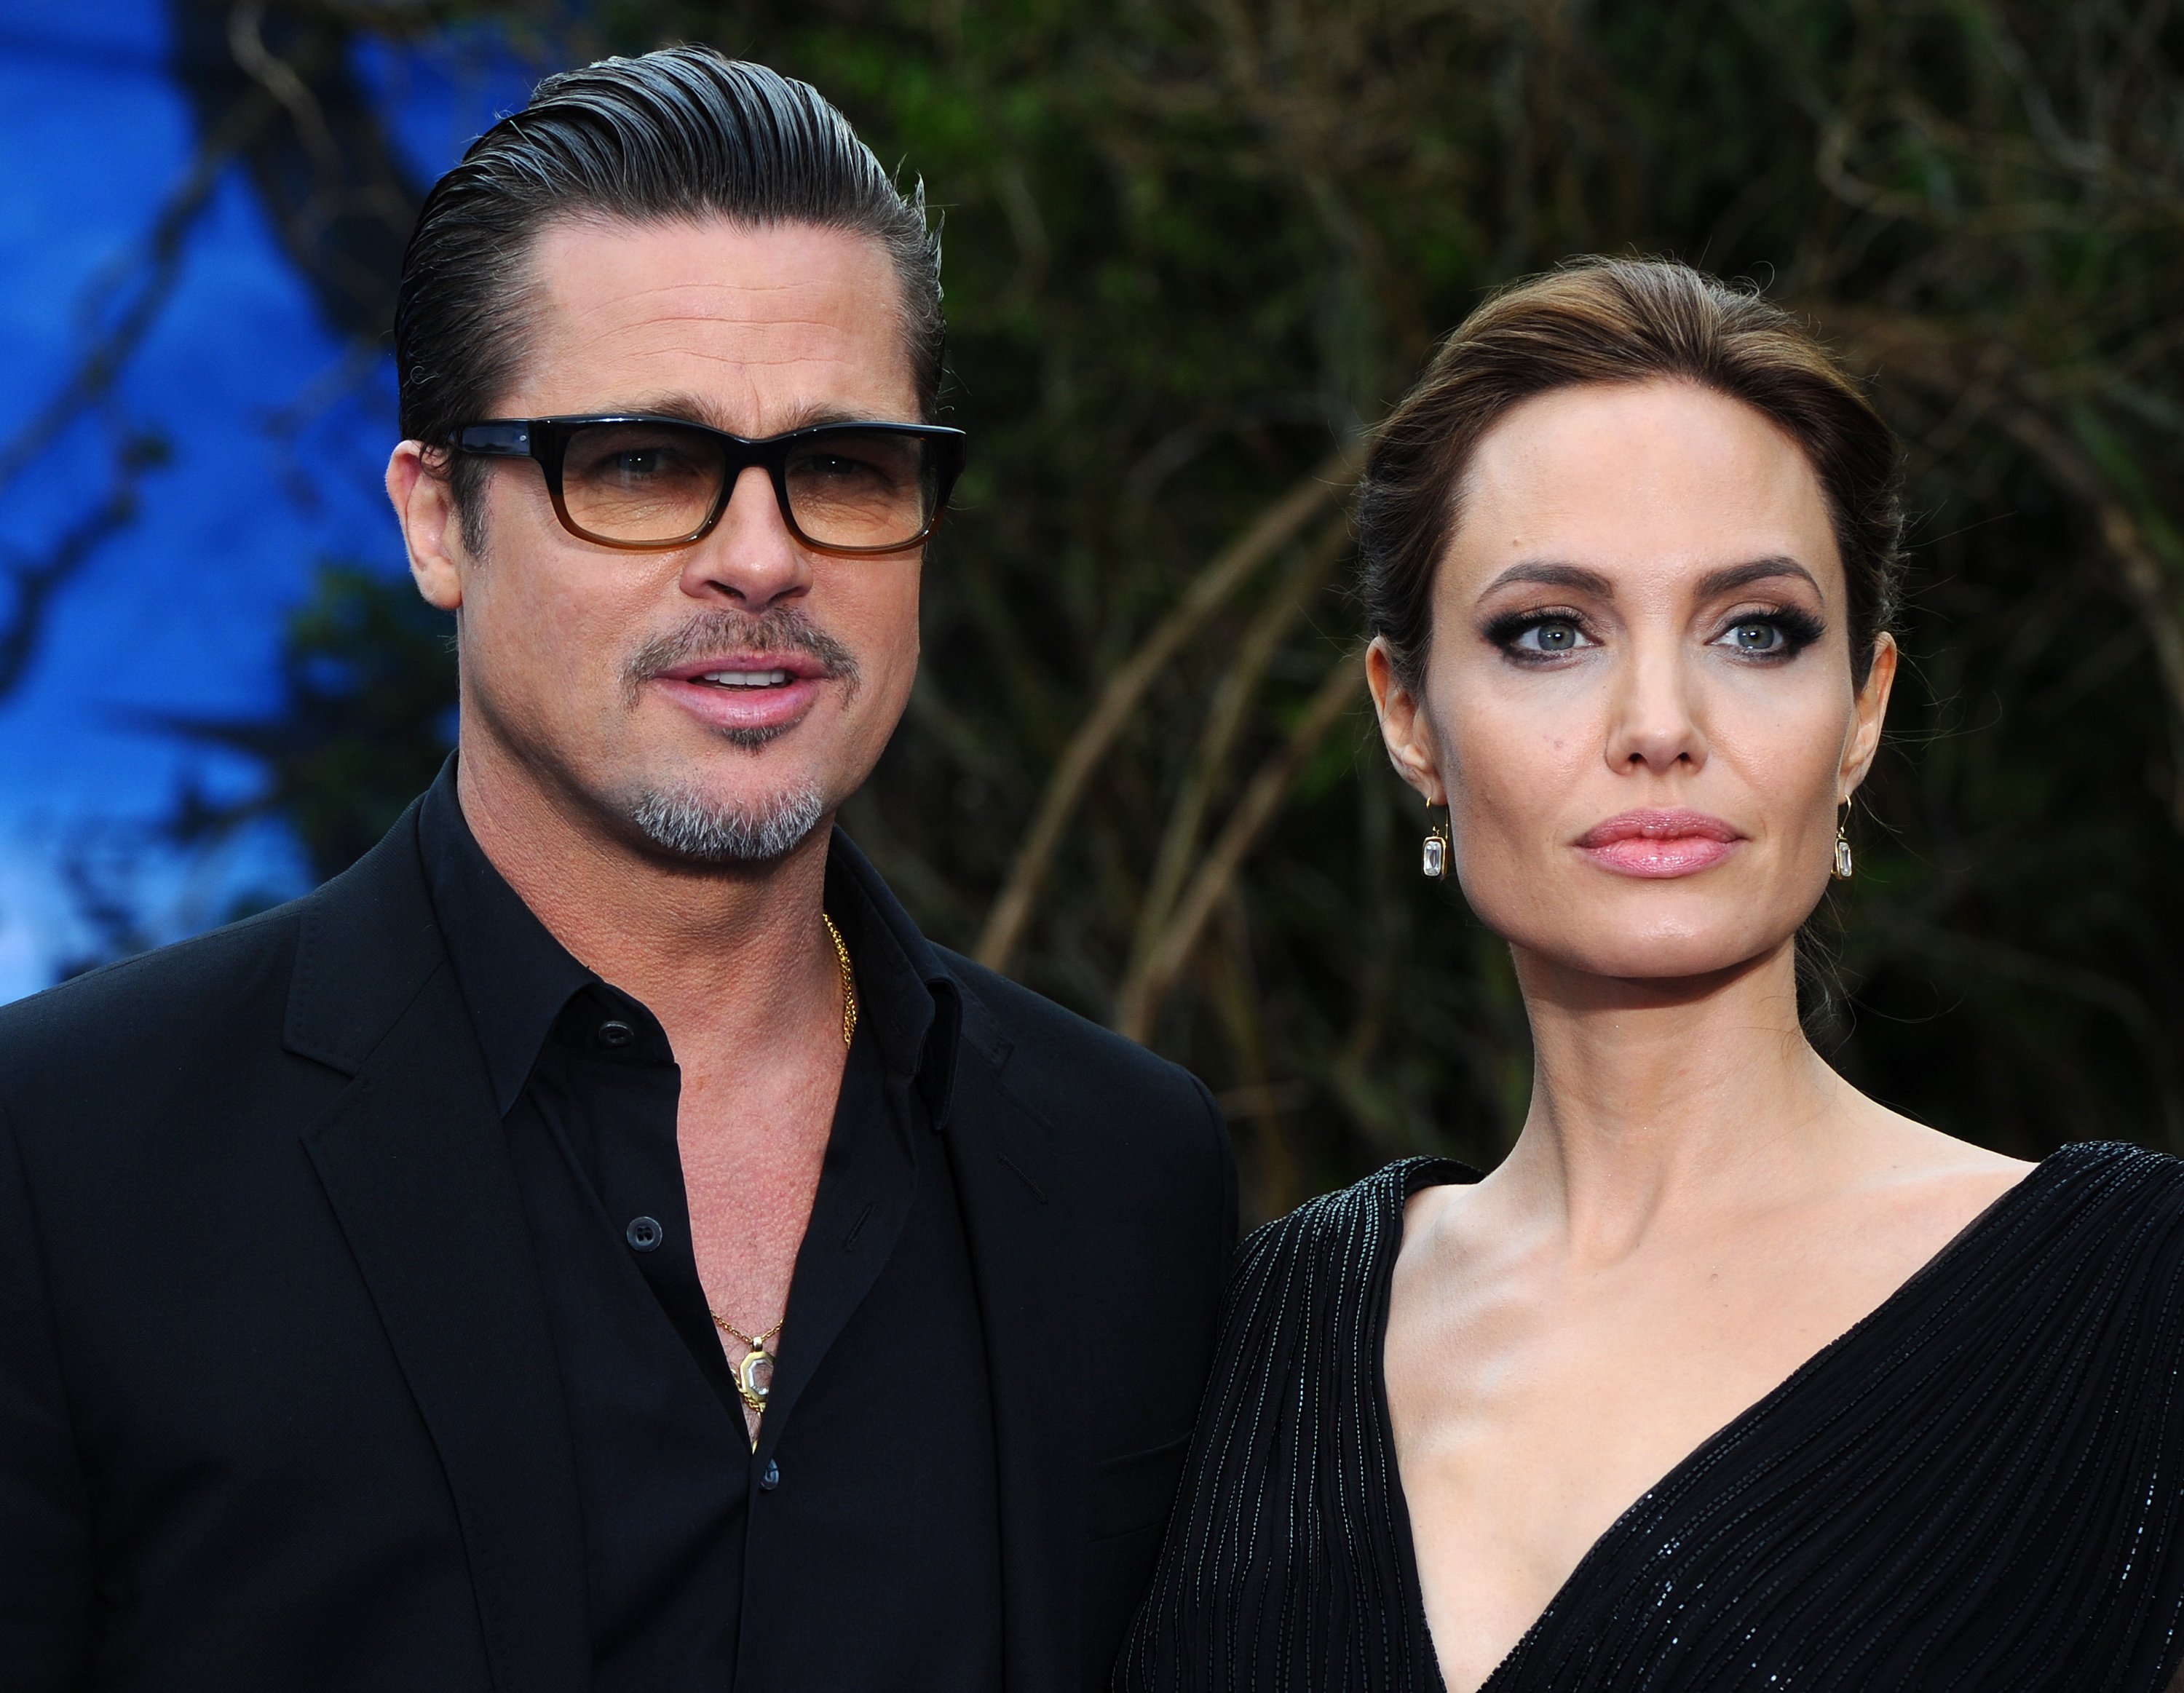 Brad Pitt and Angelina Jolie attend a private reception as costumes and props from Disney's "Maleficent" are exhibited in support of Great Ormond Street Hospital at Kensington Palace on May 8, 2014 in London, England | Source: Getty Images